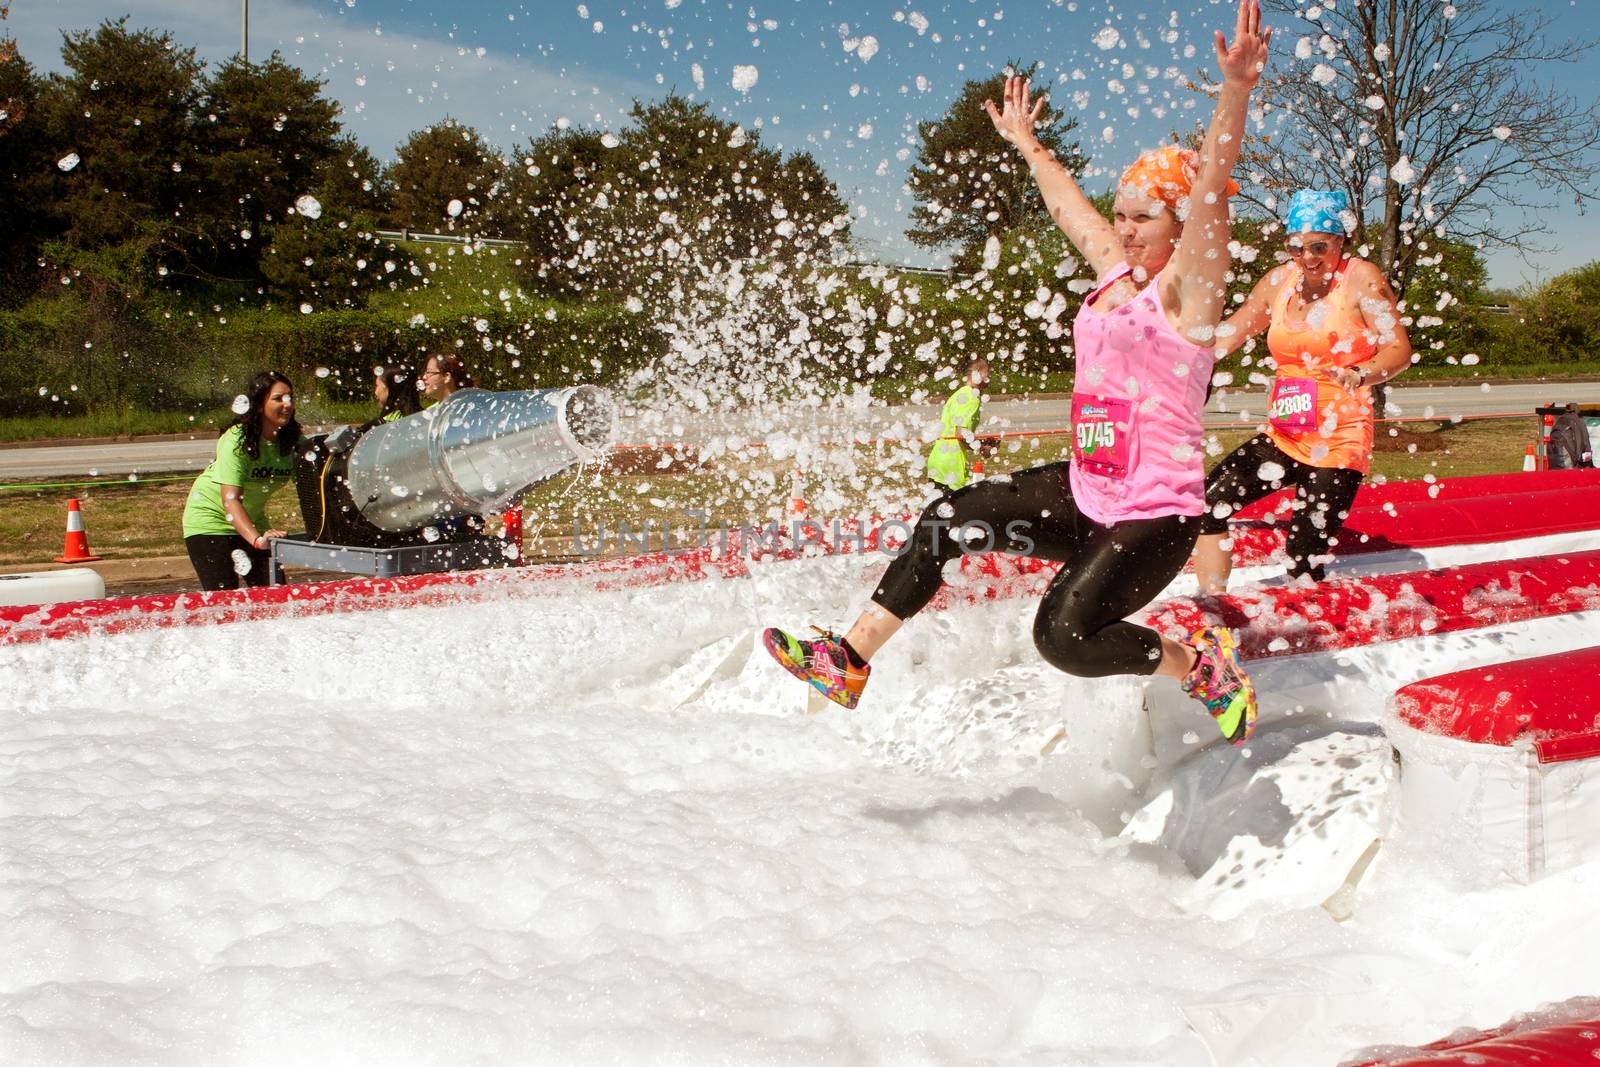 Atlanta, GA USA - April 5, 2014:  Young women get sprayed with bubbles jumping into a huge foam pit, as they take part in the Ridiculous Obstacle Challenge 5k race.